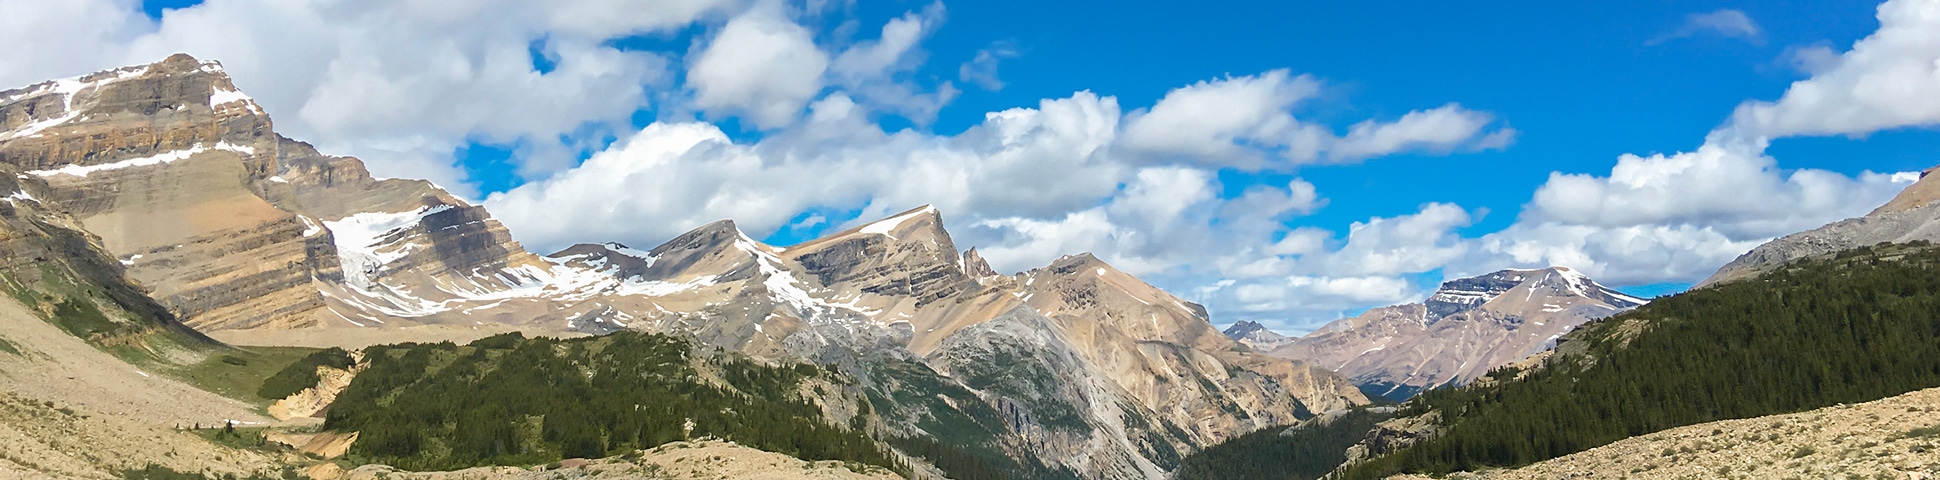 Hiking, biking and snowshoeing along Icefields Parkway in the Canadian Rockies